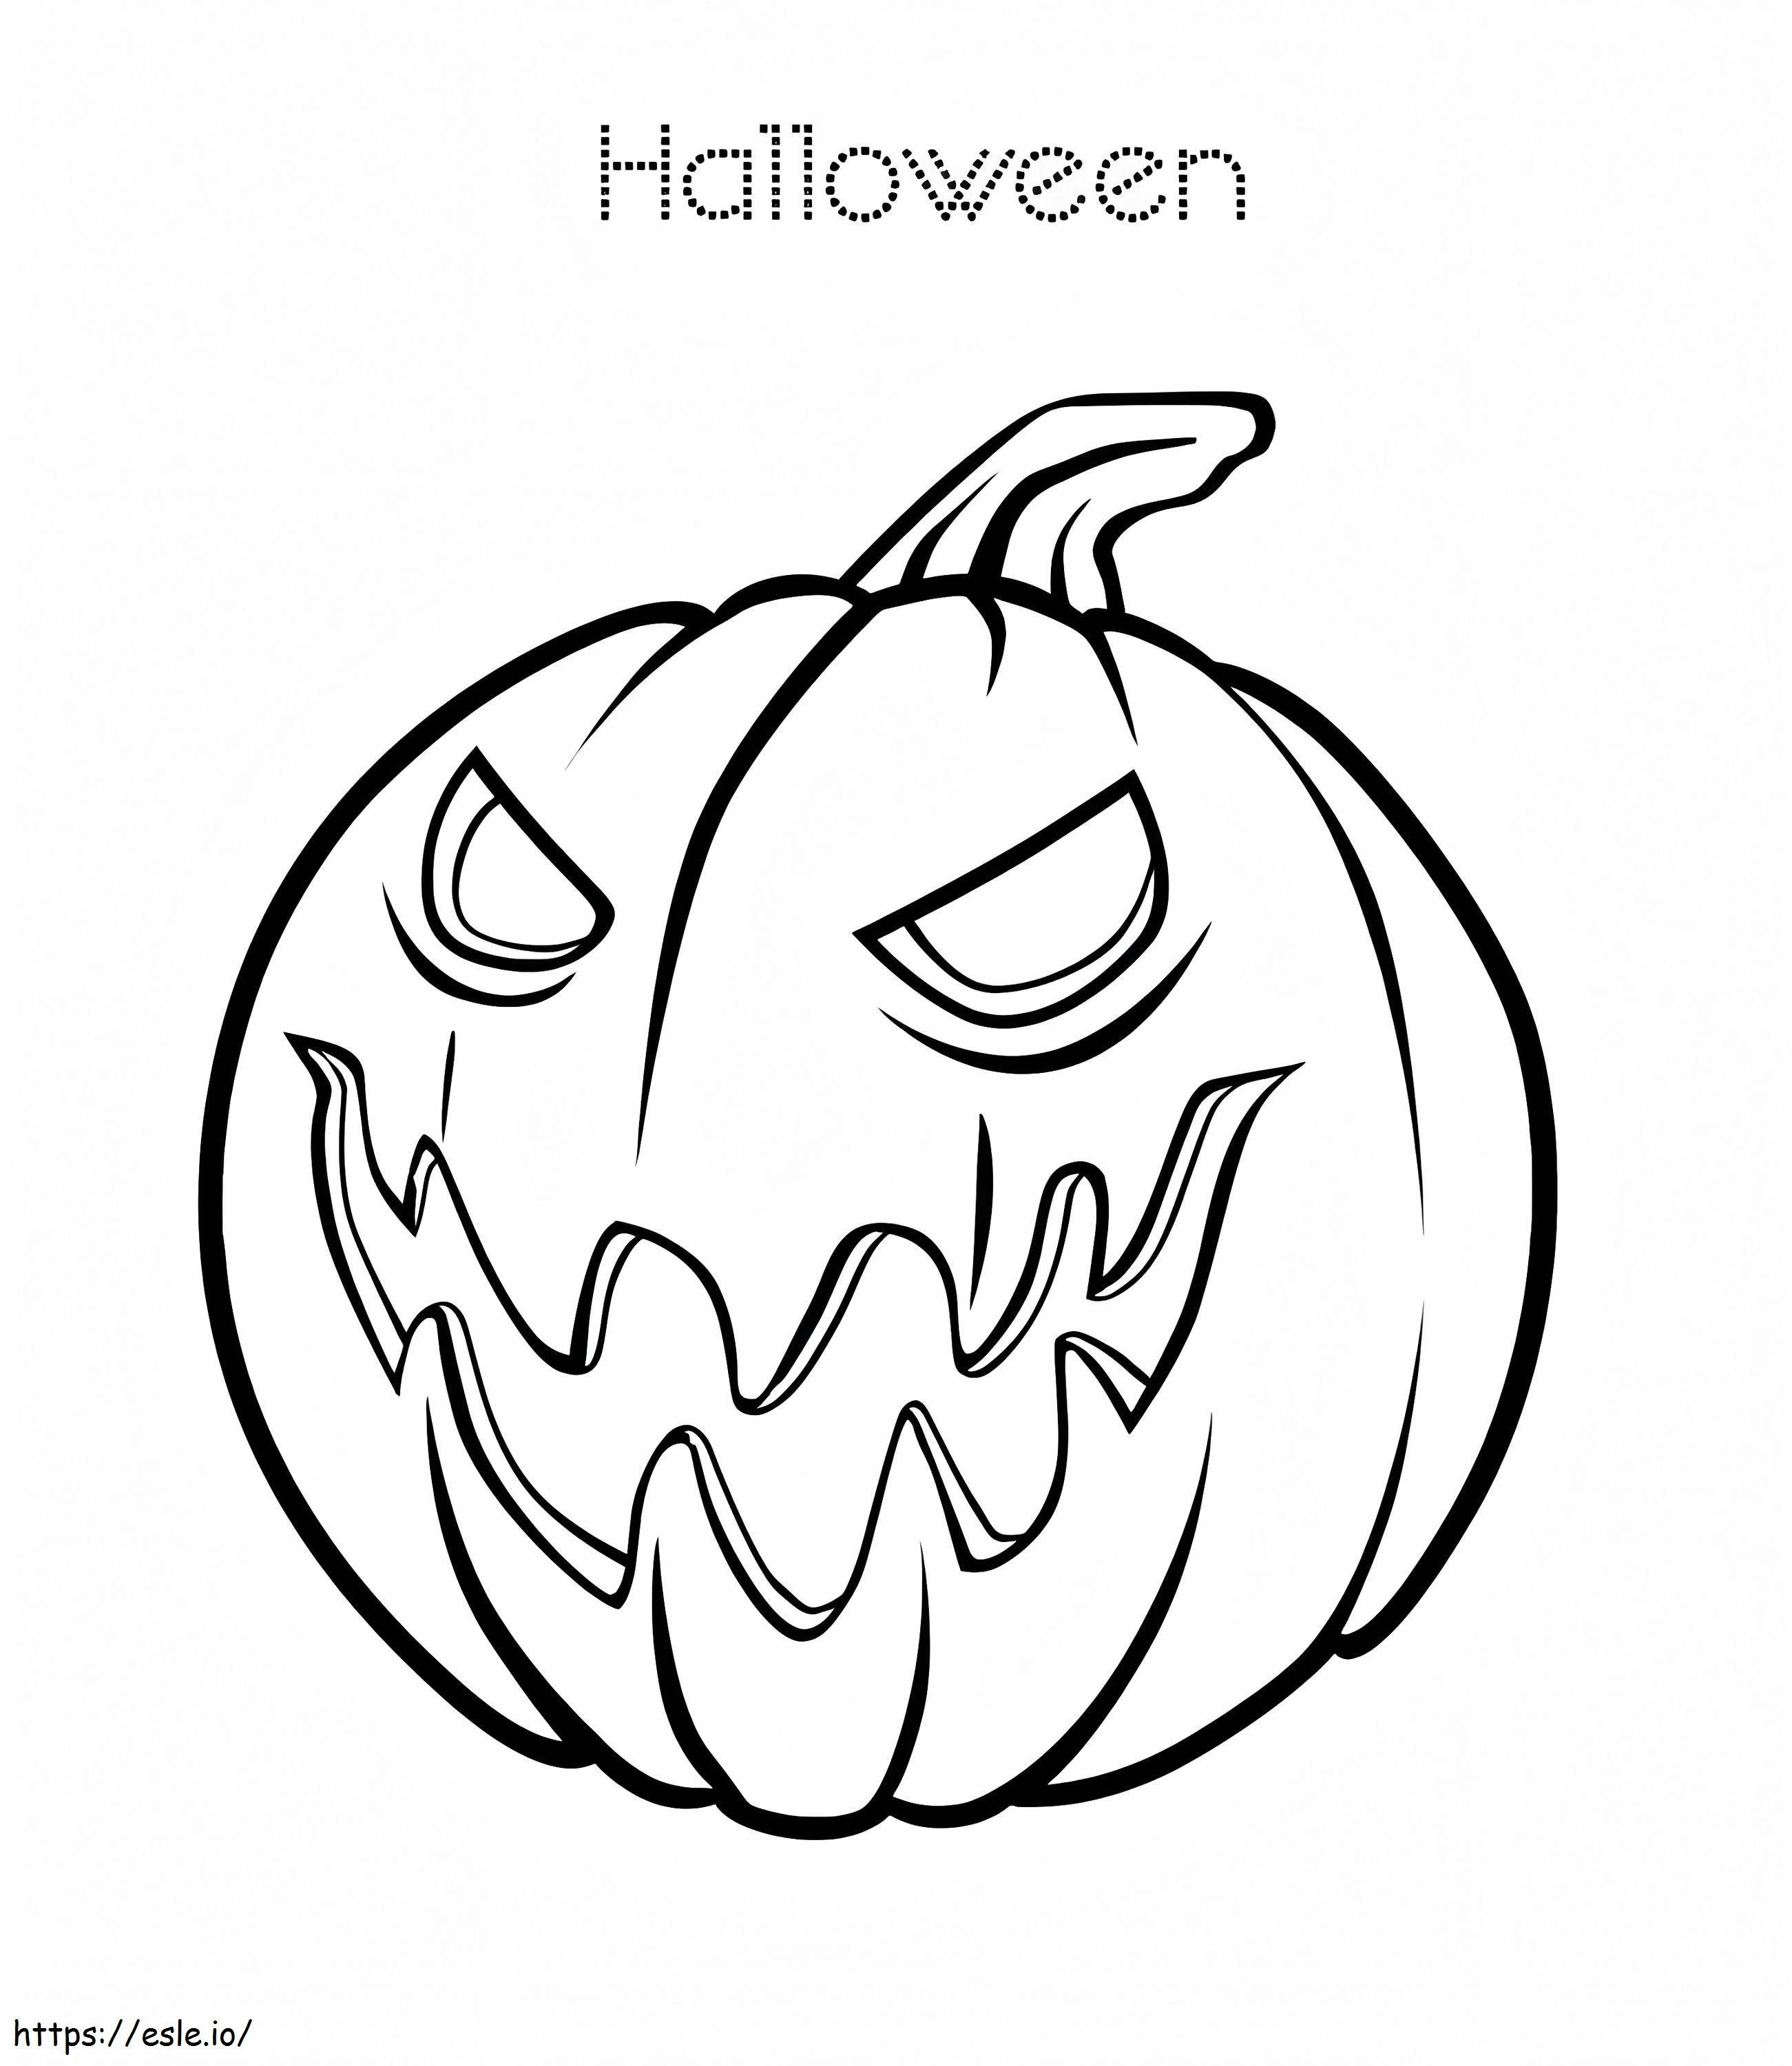 Basic scary pumpkin coloring page